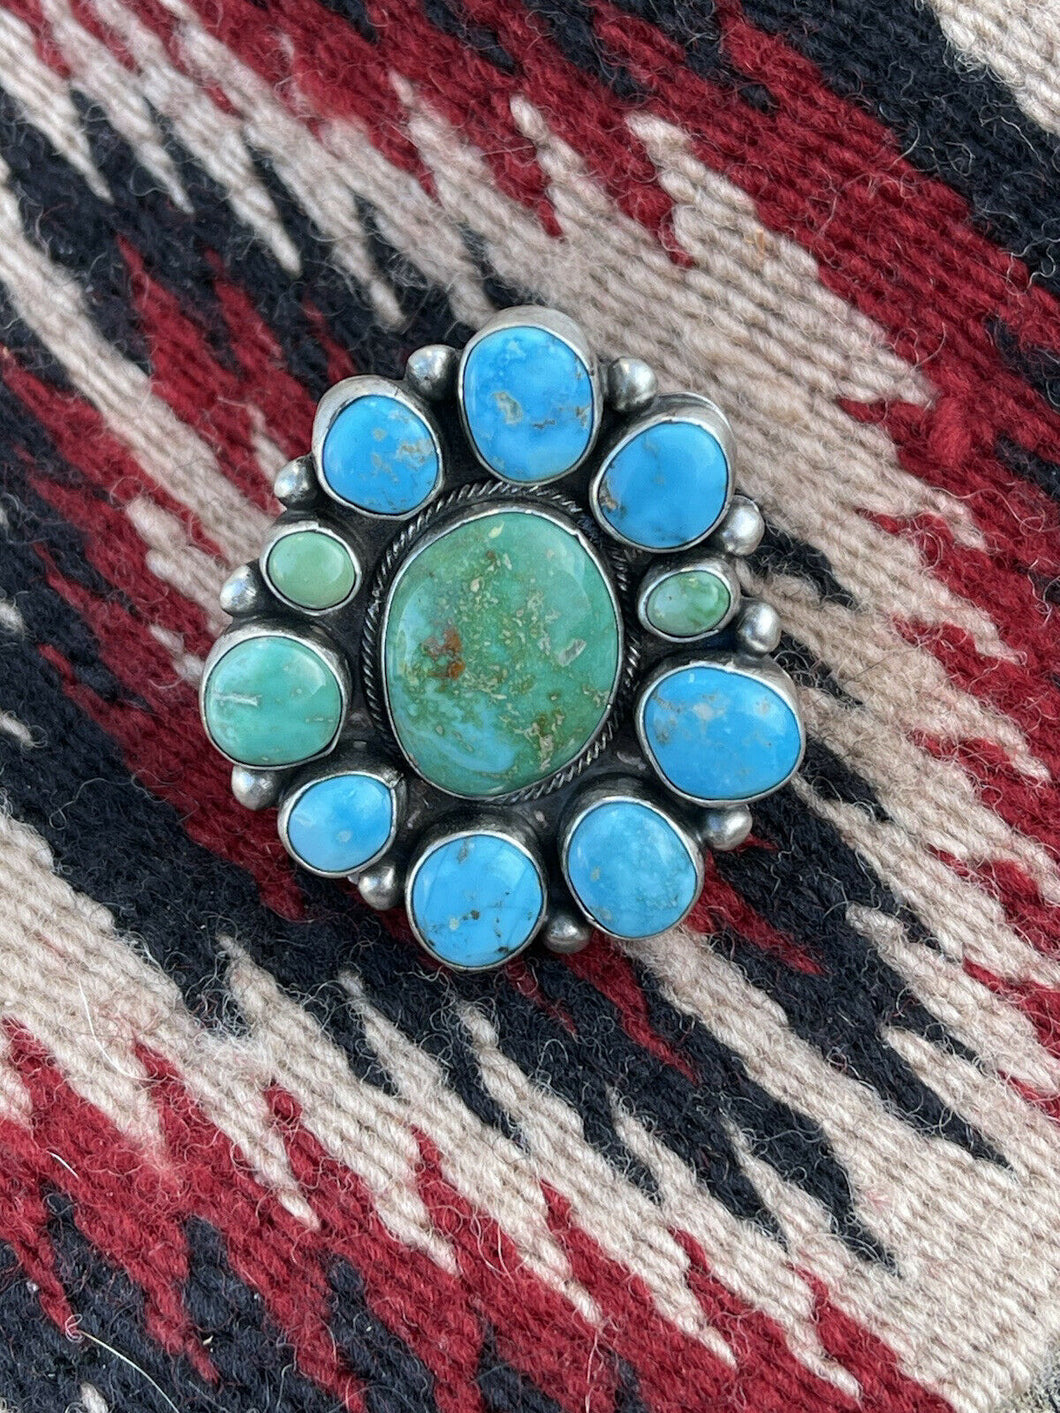 Navajo Sterling Sonoran Gold And Golden Hills Turquoise Cluster Ring Size 9